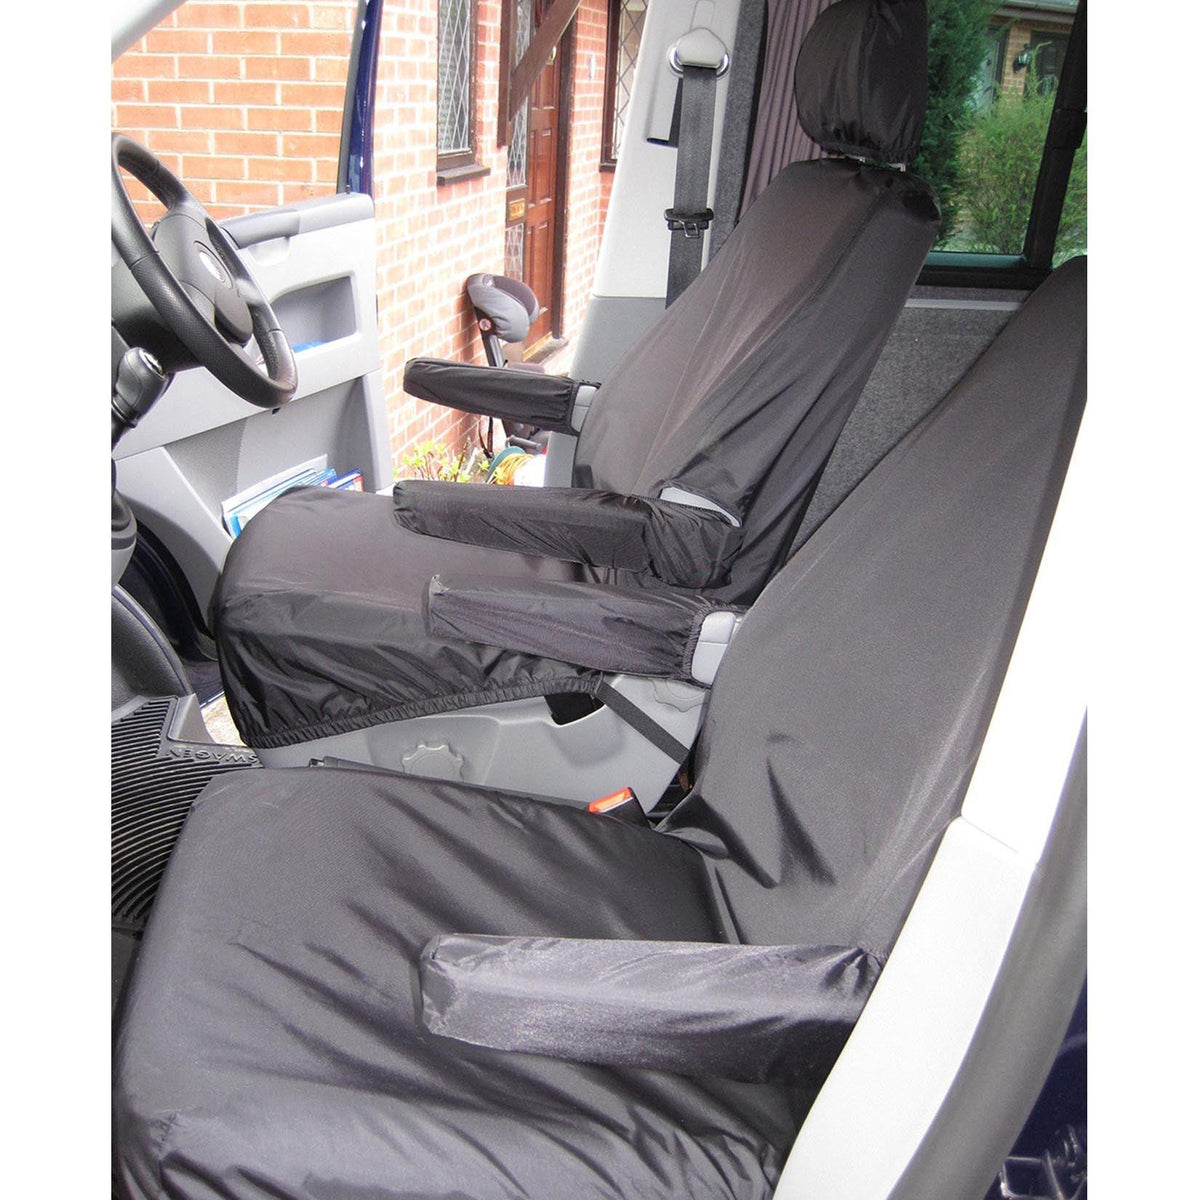 VW TRANSPORTER T5 2003-2009 FRONT PAIR SEAT COVERS NO ARMRESTS - BLACK - Storm Xccessories2